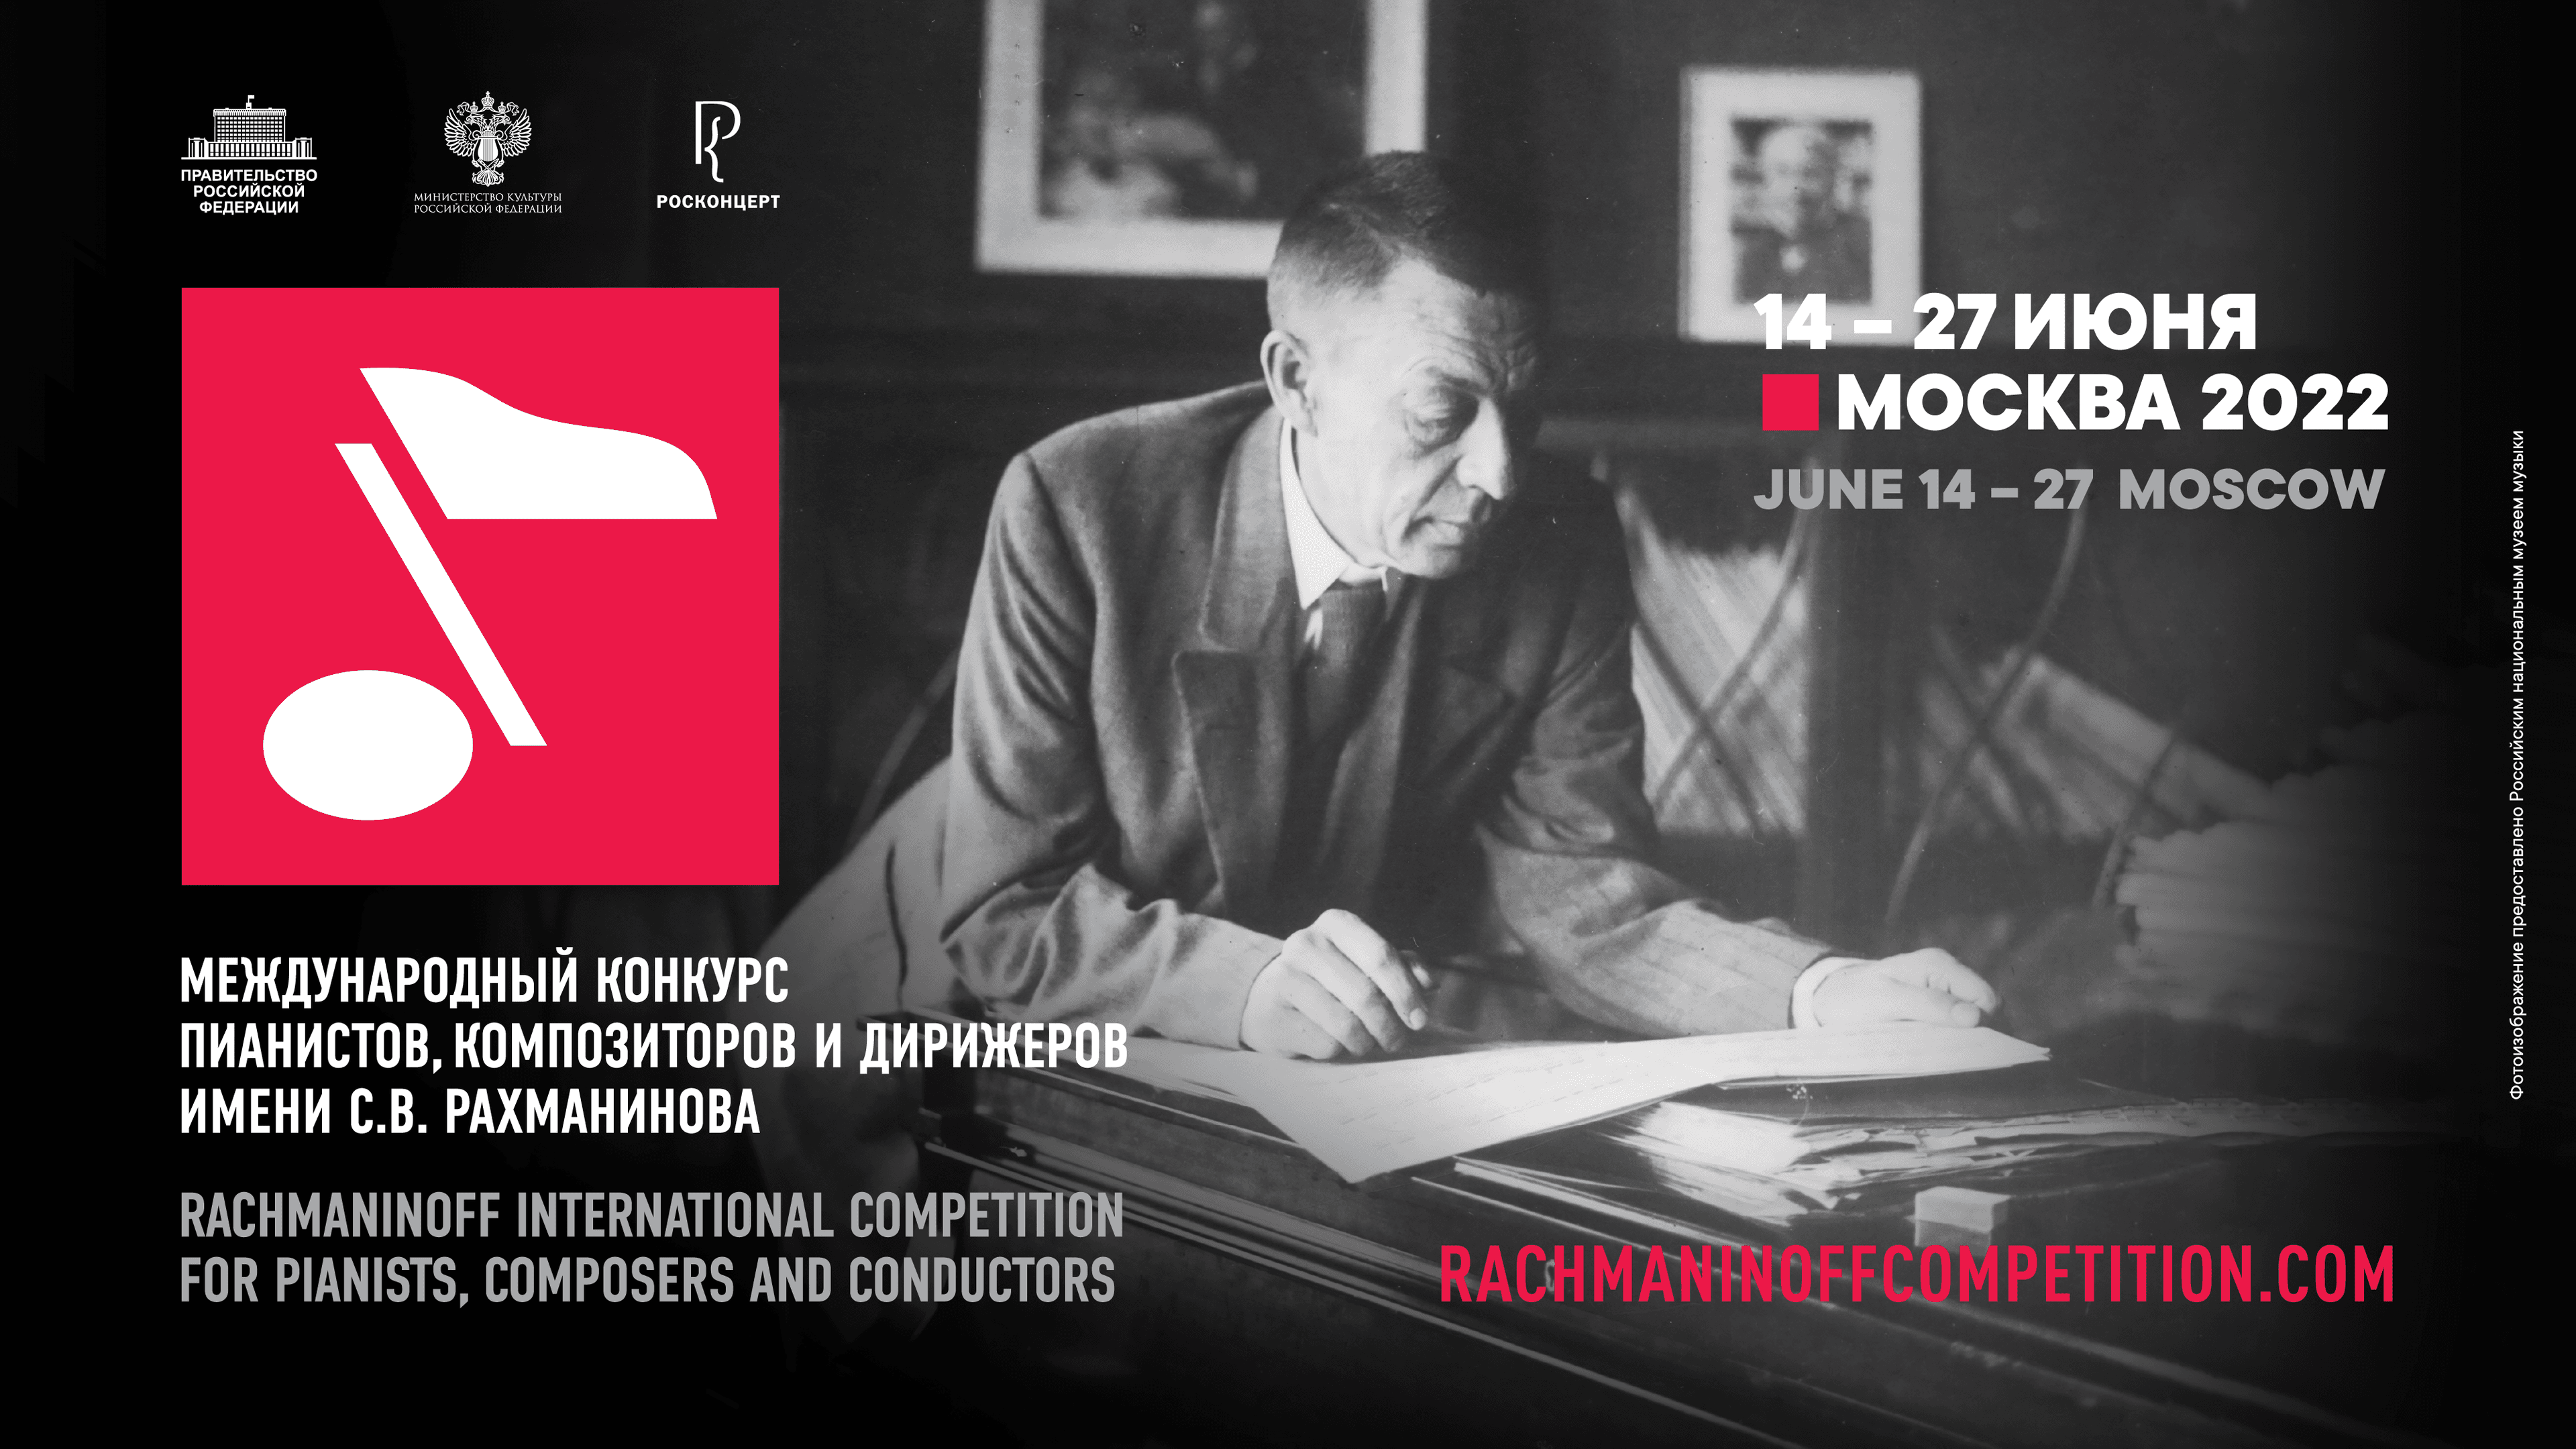 Rachmaninoff International Competition for Pianists, Composers and Conductors is ended